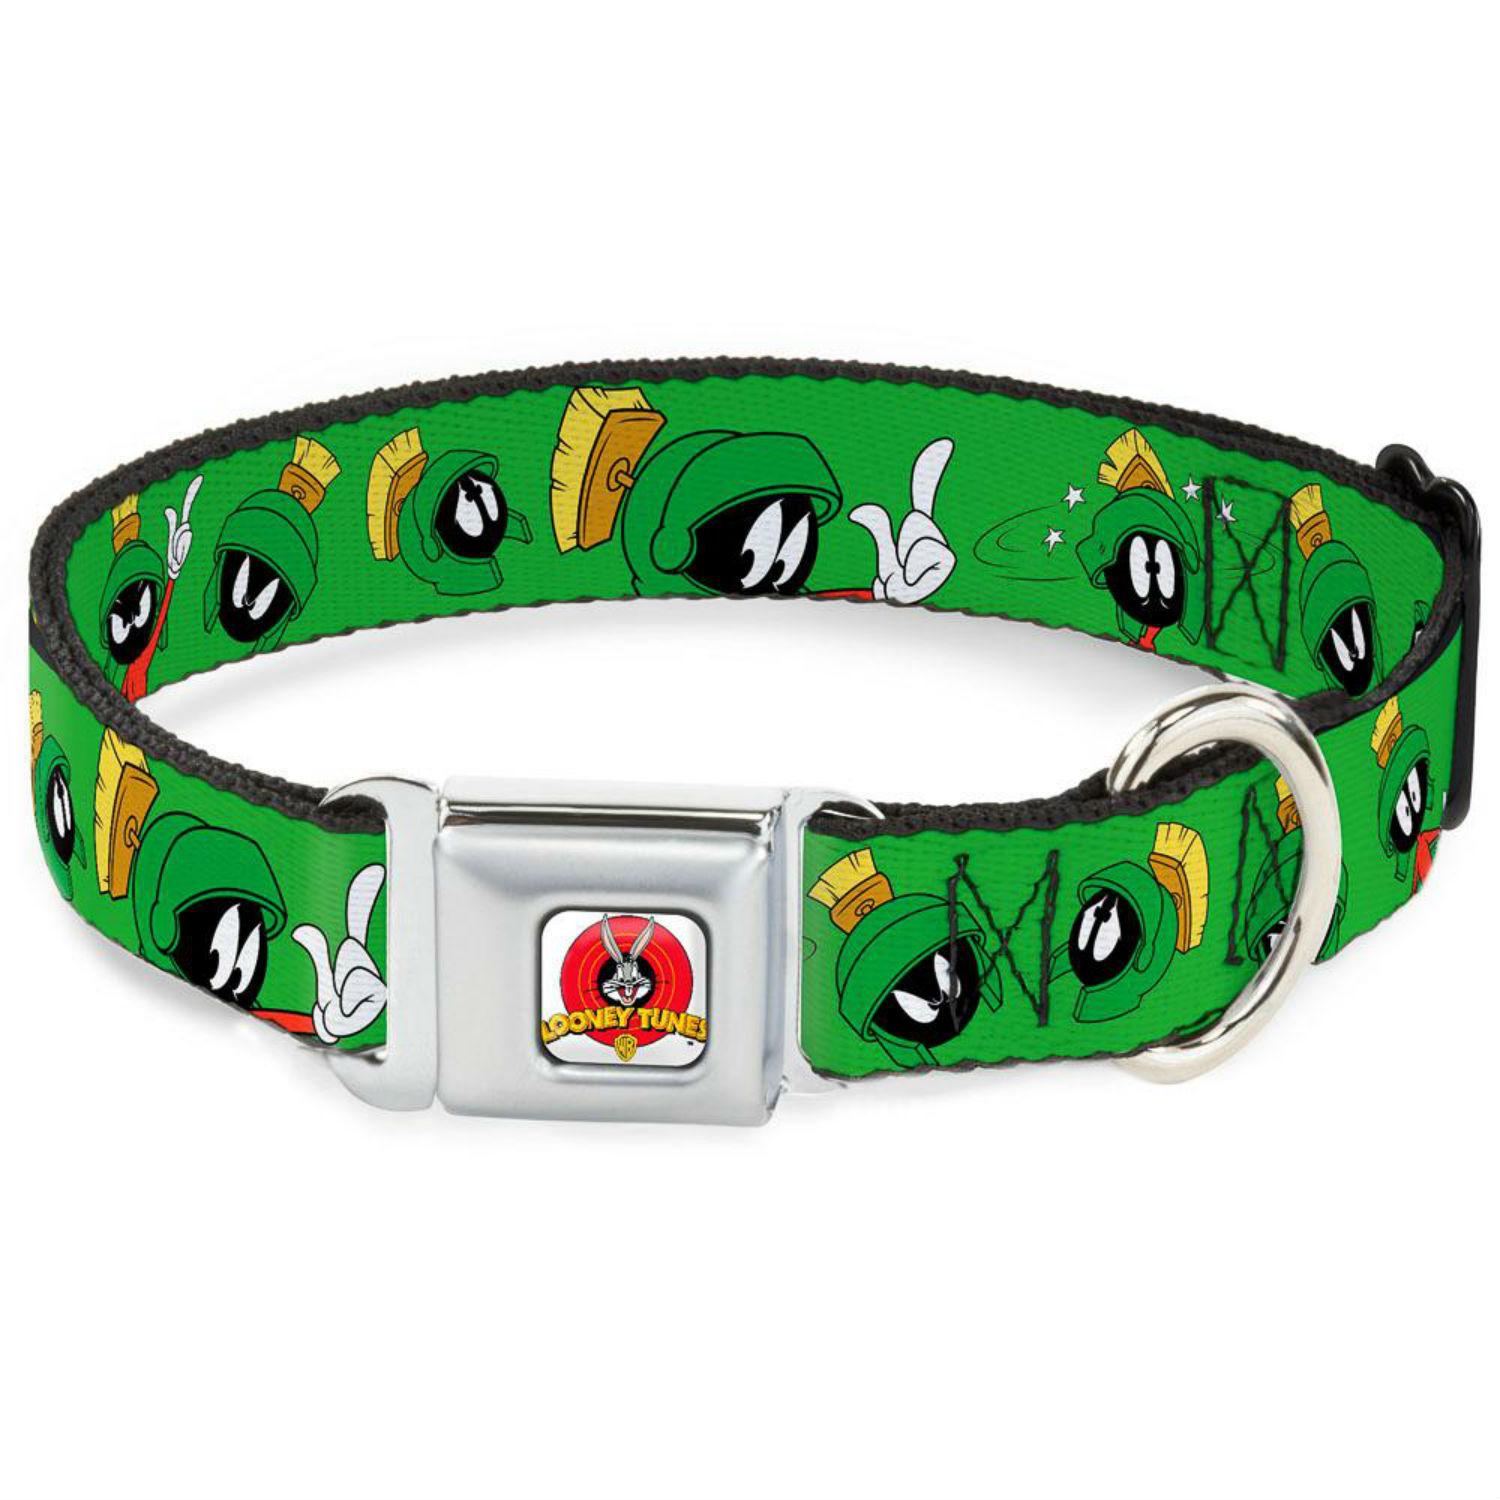 Marvin the Martian Seatbelt Buckle Dog Collar by Buckle-Down 